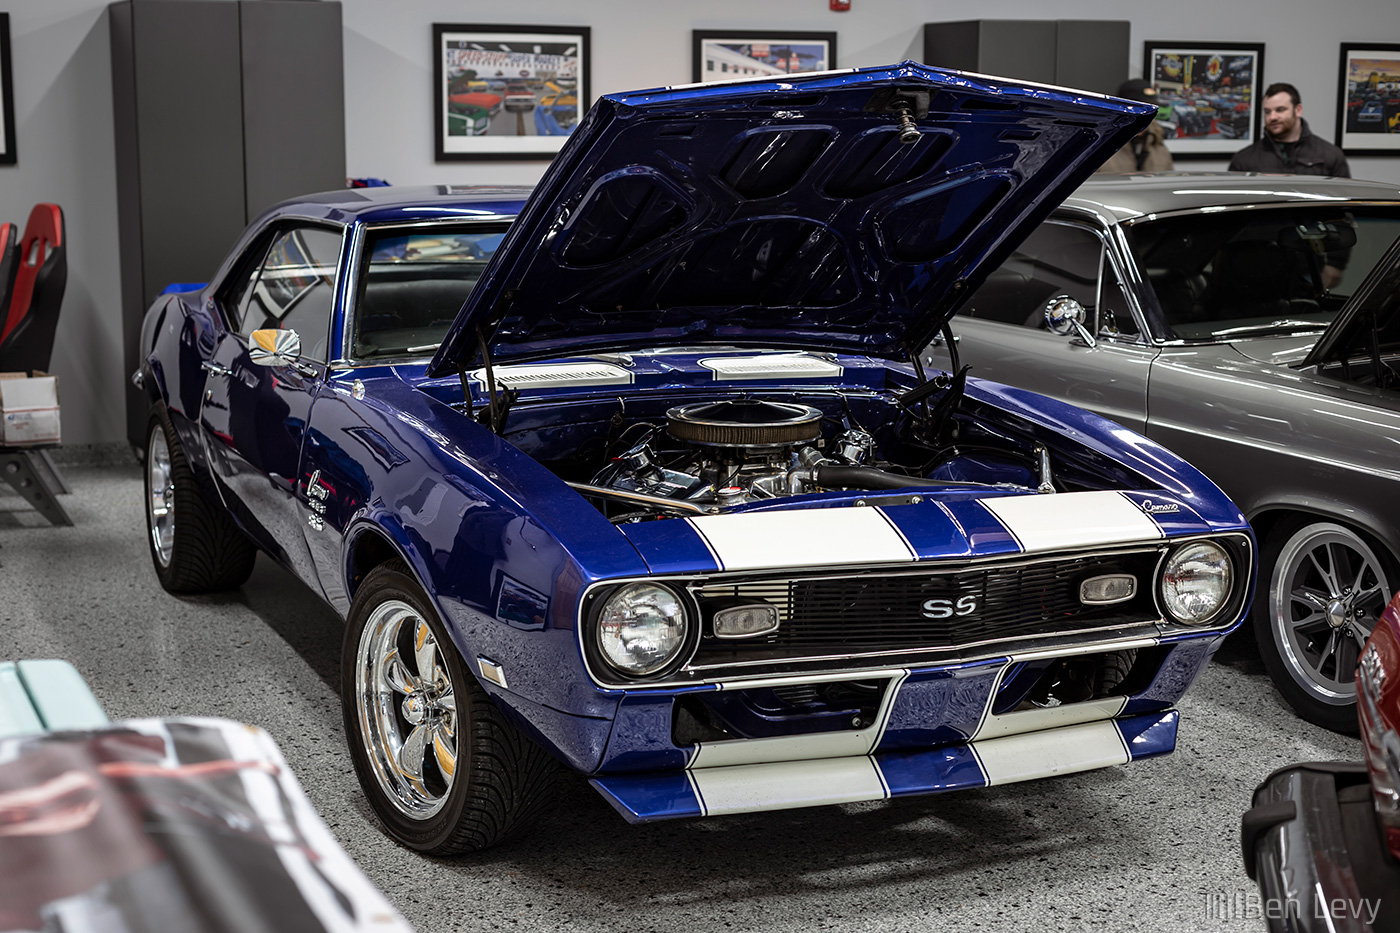 Blue Chevy Camro SS